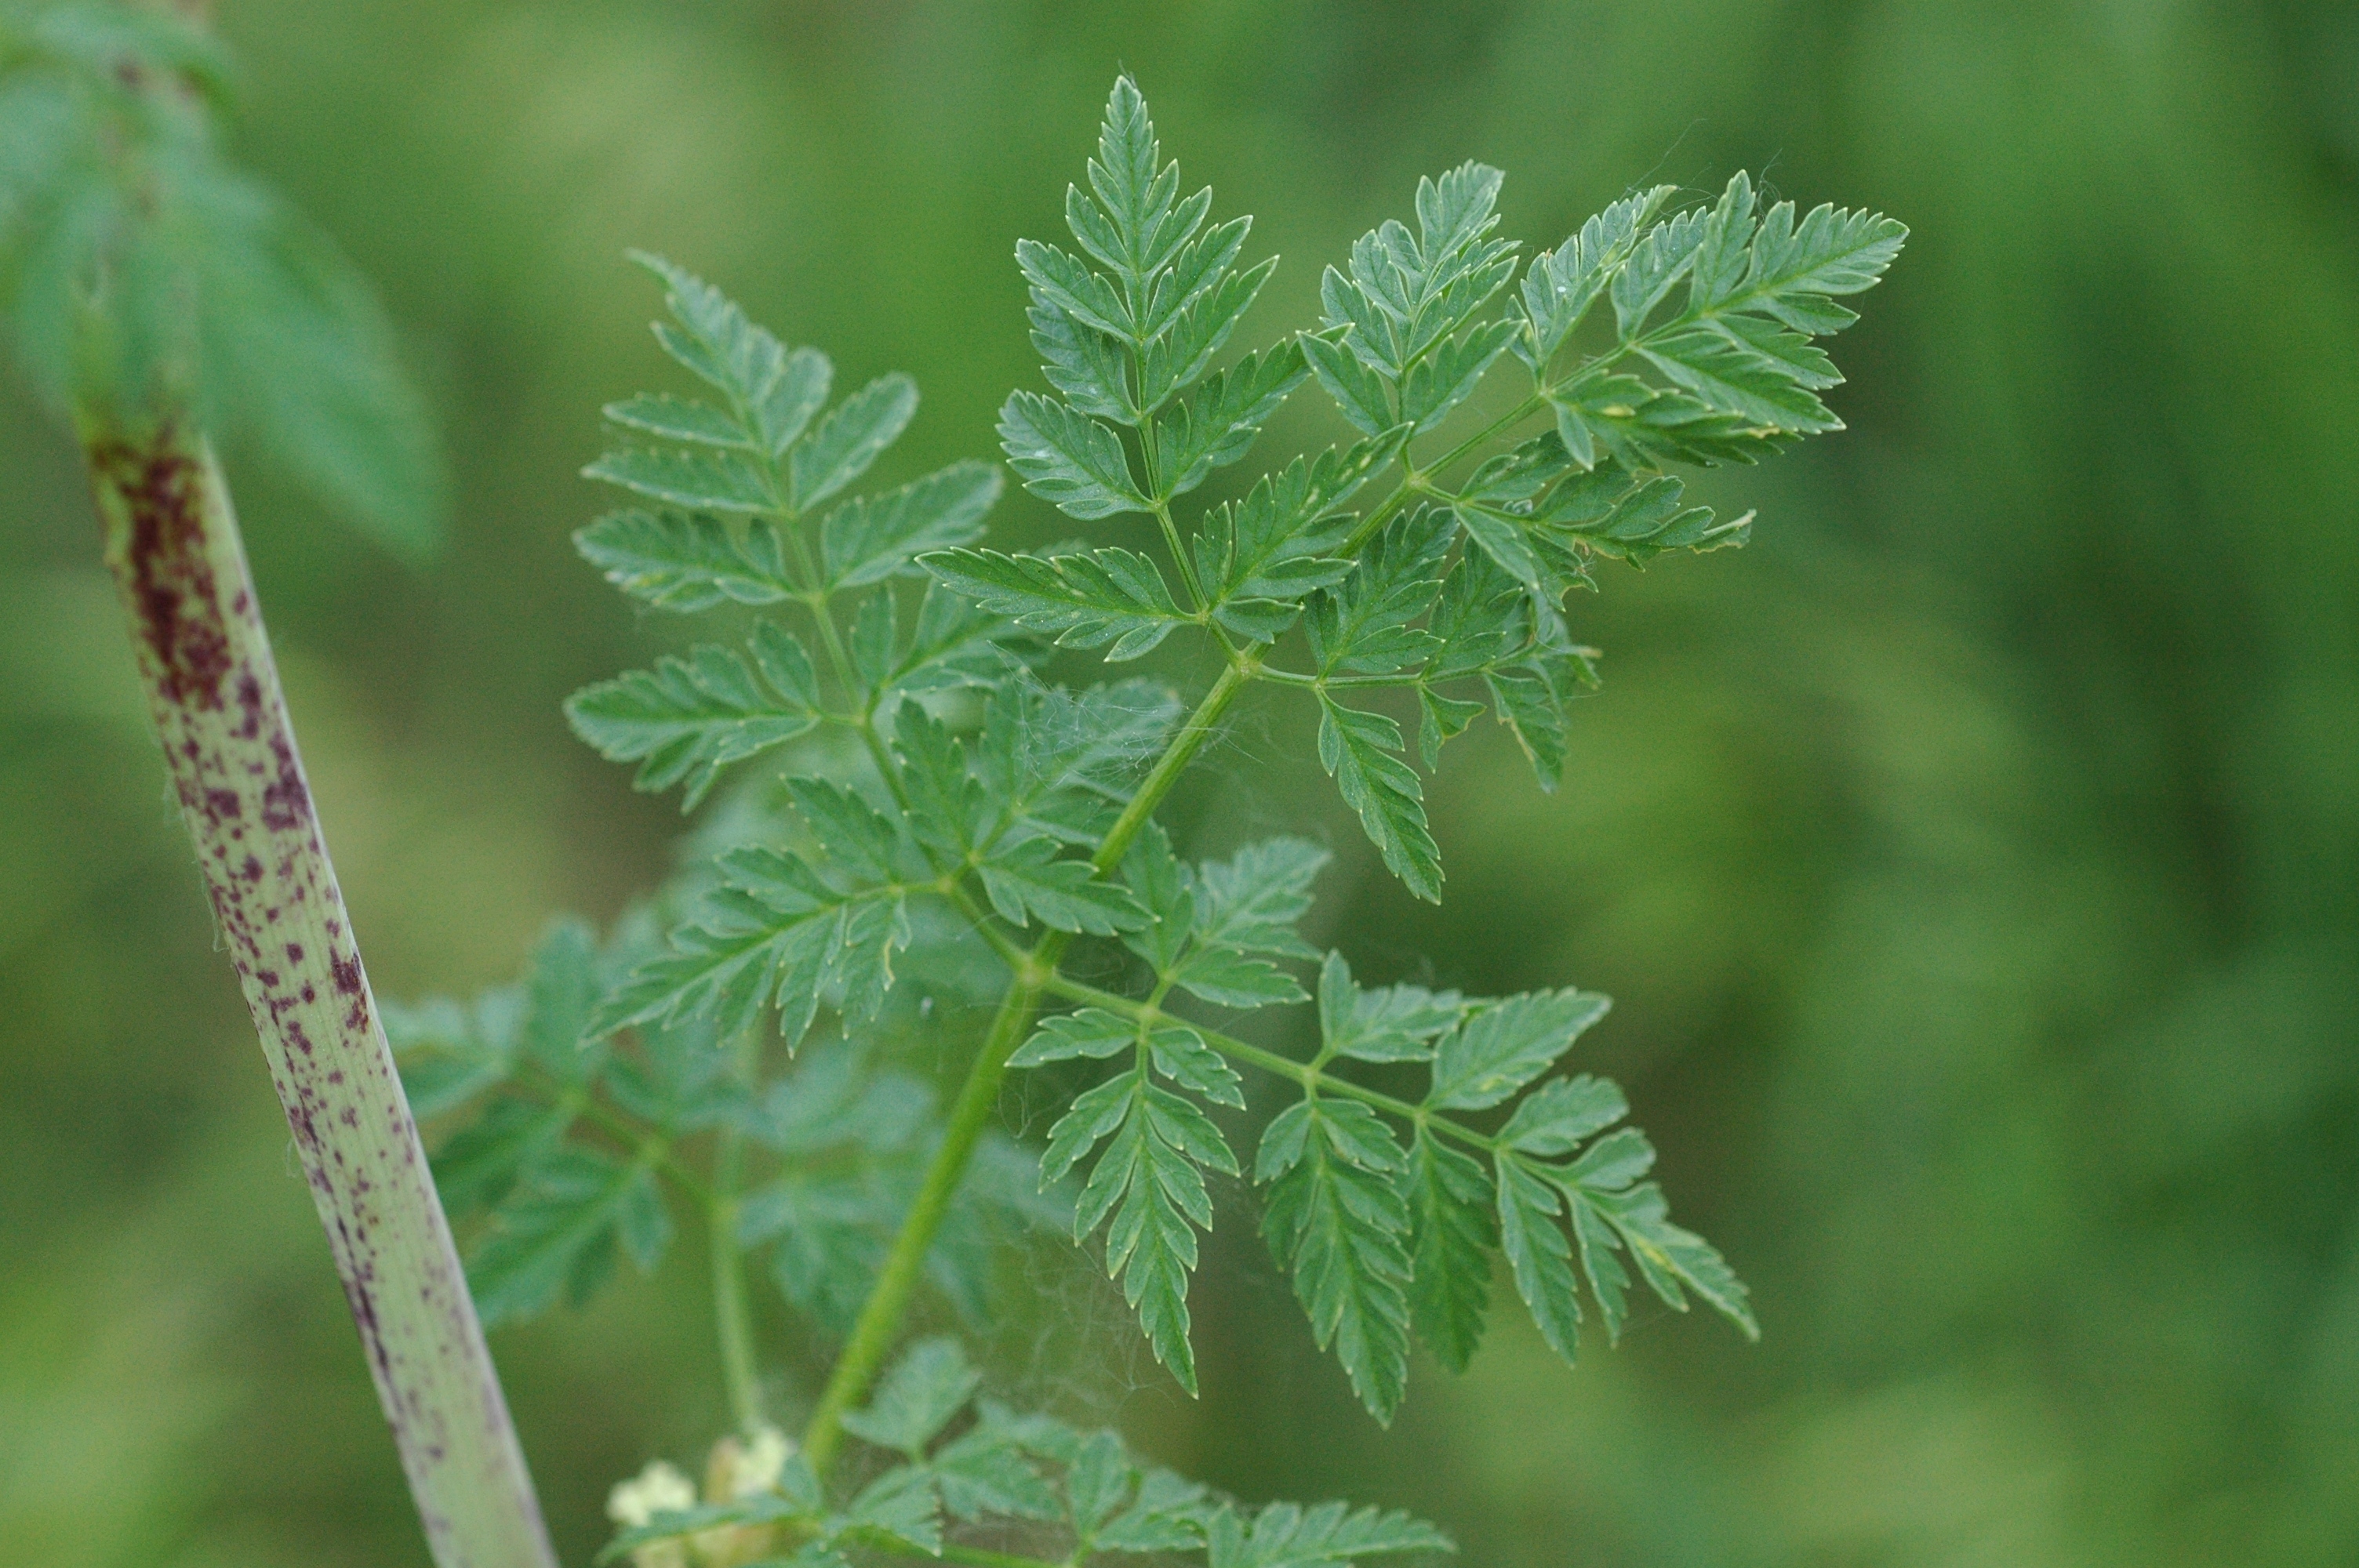 Poison hemlock is a growing challenge for cattle producers